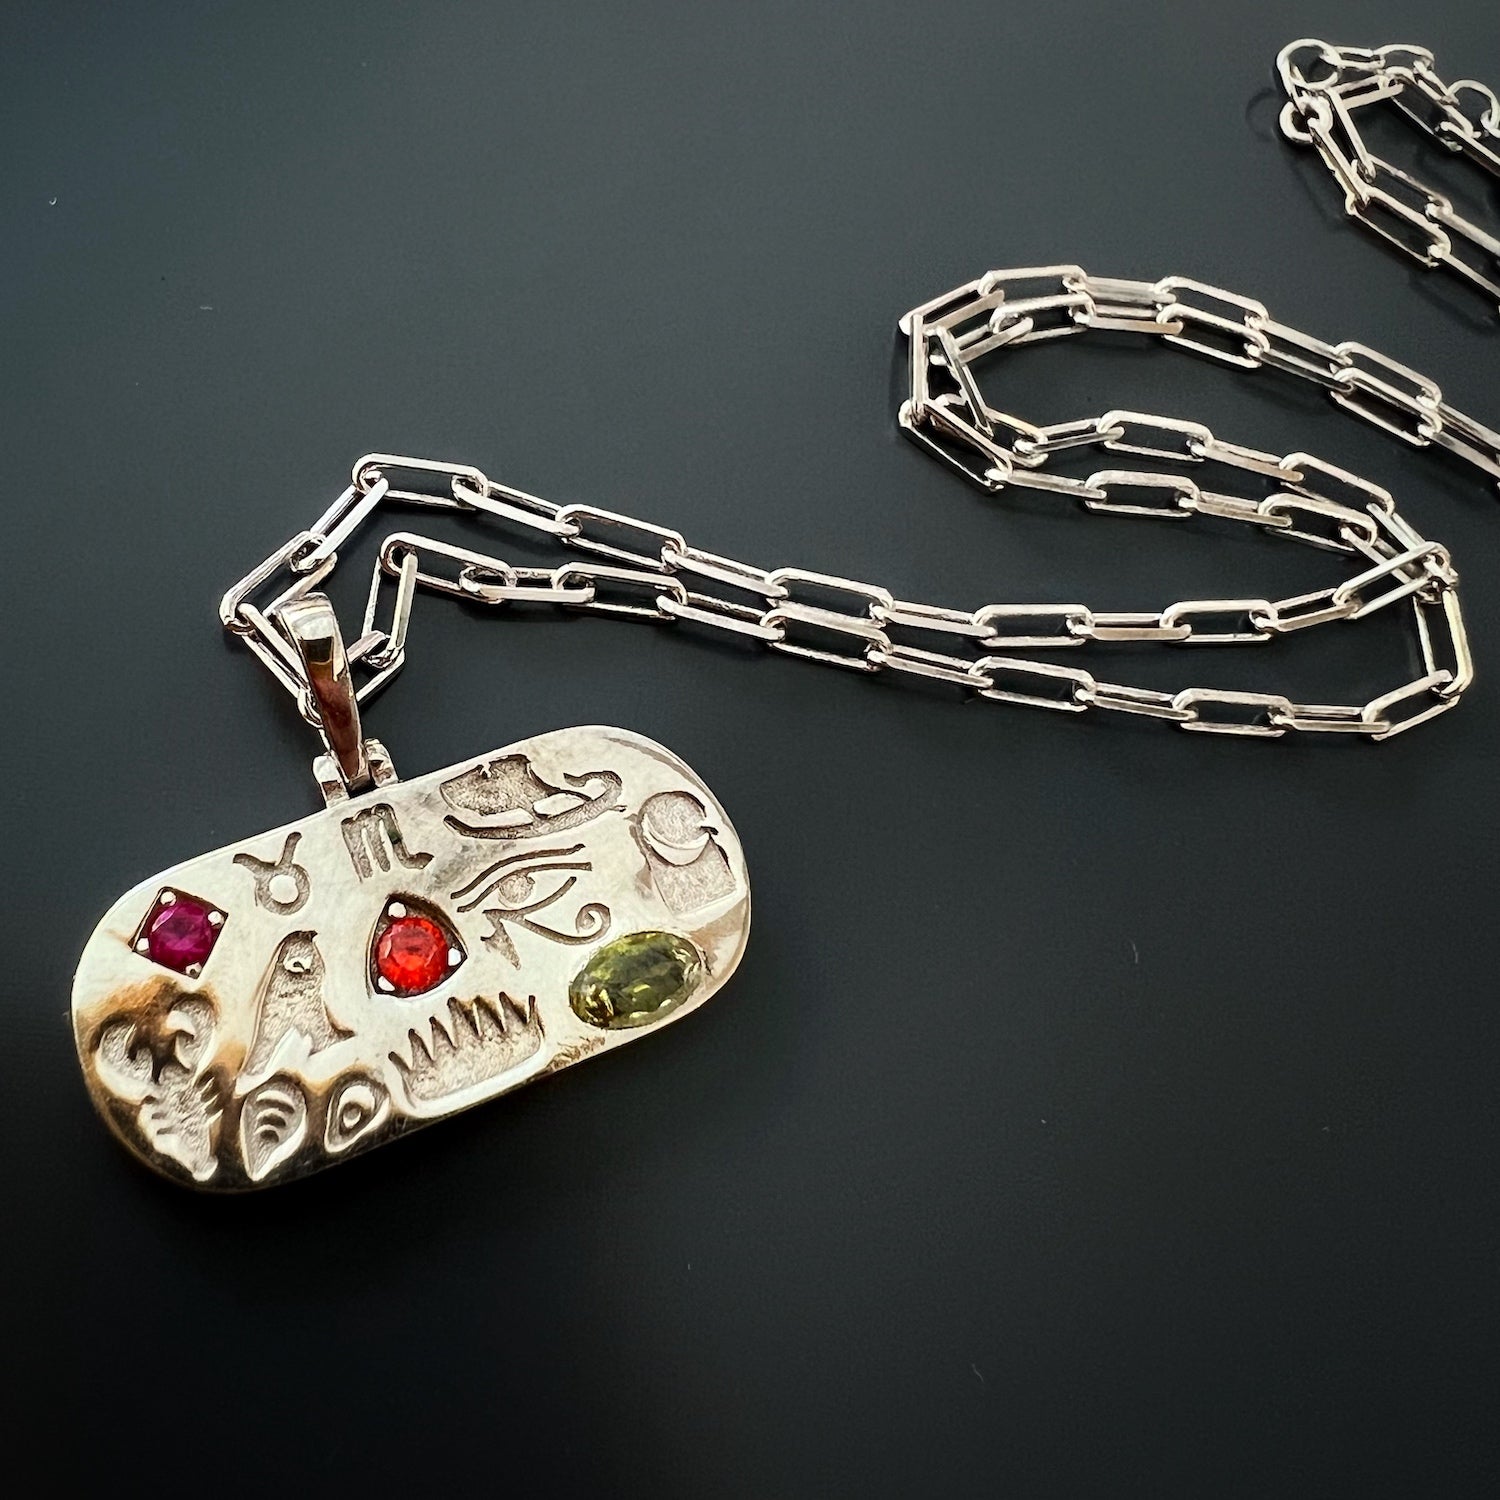 Sterling Silver Necklace with Egyptian Symbols Pendant, a unique and meaningful piece of handmade jewelry.